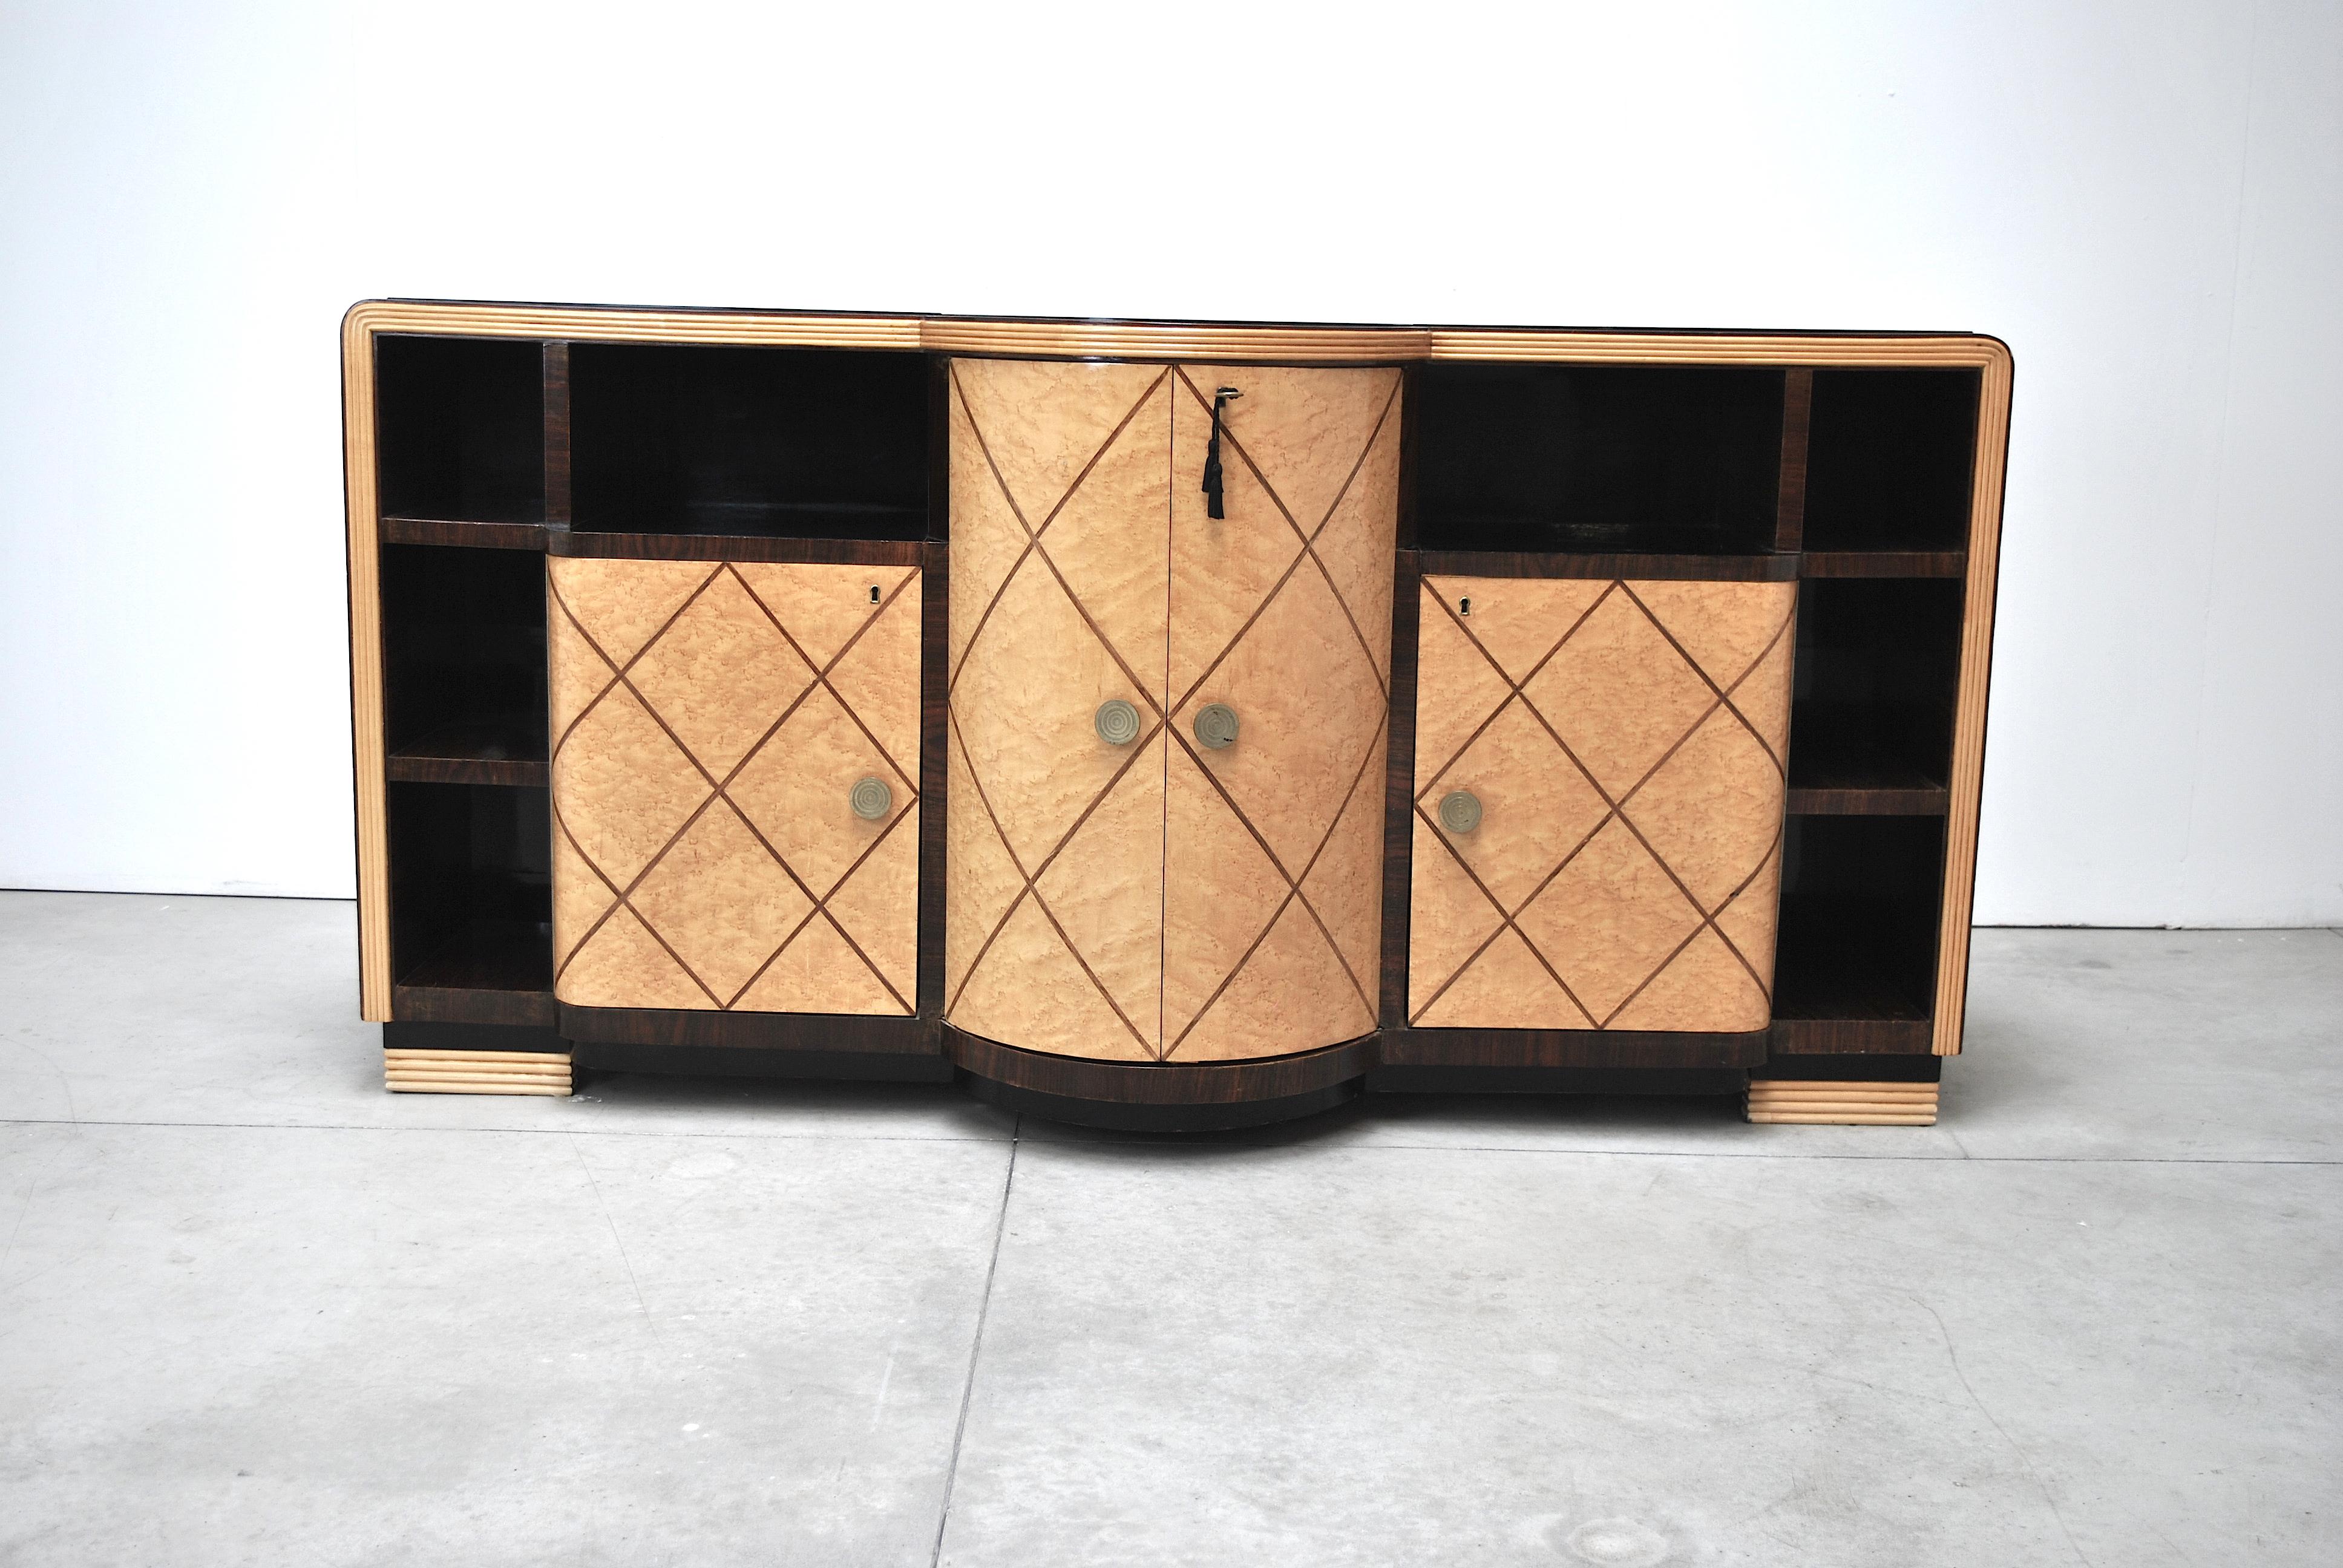 Elegant Art Deco cabinet bar in the style of De Coene. This sideboard has two lateral cabinets, a central cabinet with two doors and a black glass surface.